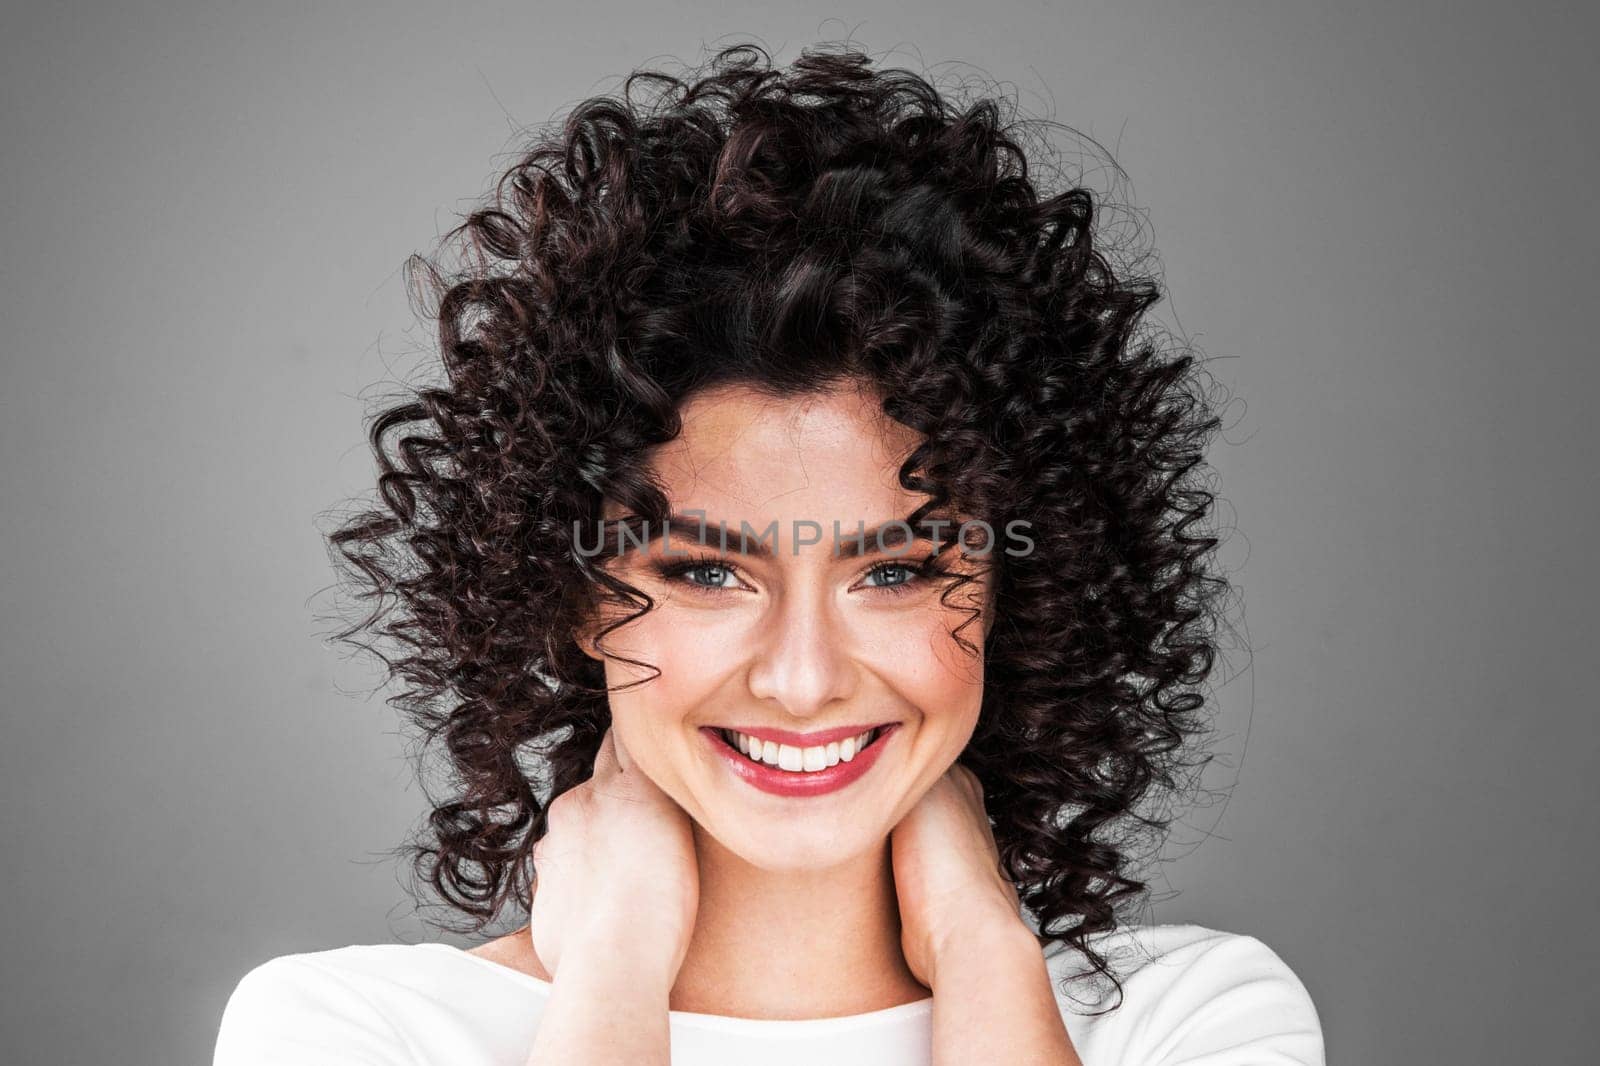 Portrait of amazing beautiful smiling woman with curly hair on gray background with copy space